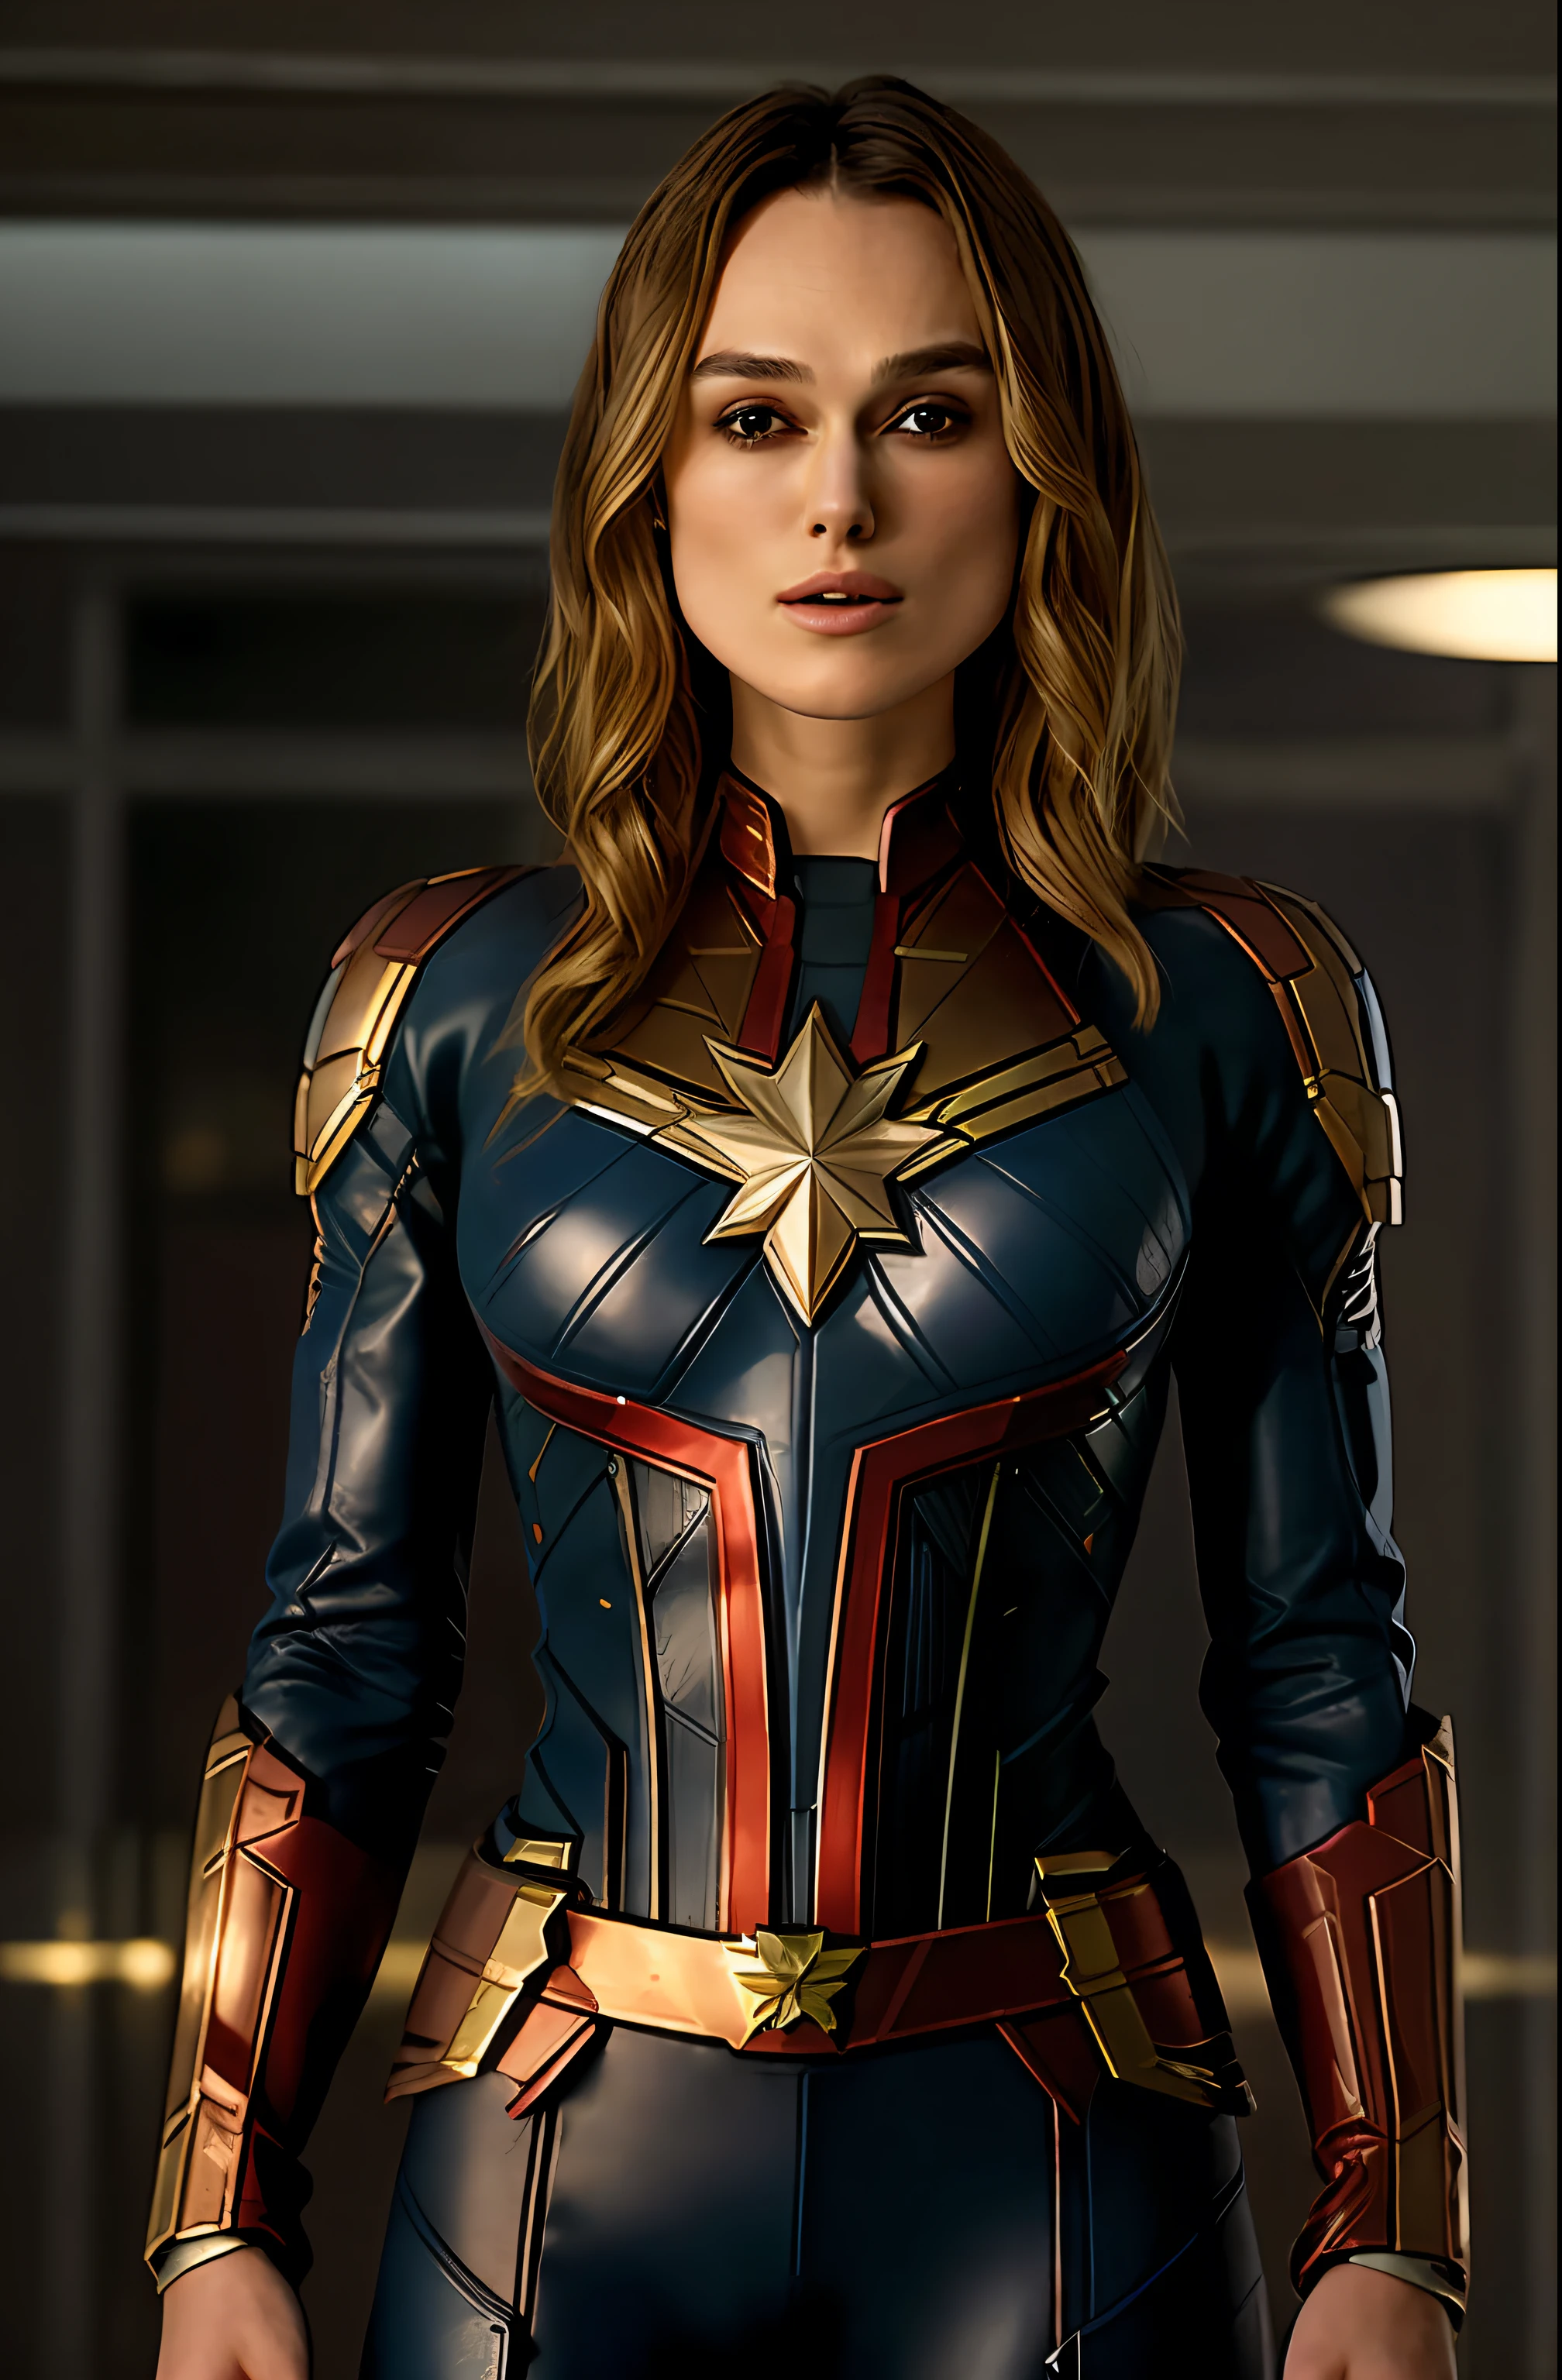 Masterpiece, best quality, extremely beautiful, perfect face, high clarity eyes, flawless, highly detailed, perfect body, Face of keira knightley, Keira Knightley as captain mervel, blonde hair, medium hair, full body portrait, wearing captain marvel outfit, sexy, cleavage, breasts showing,